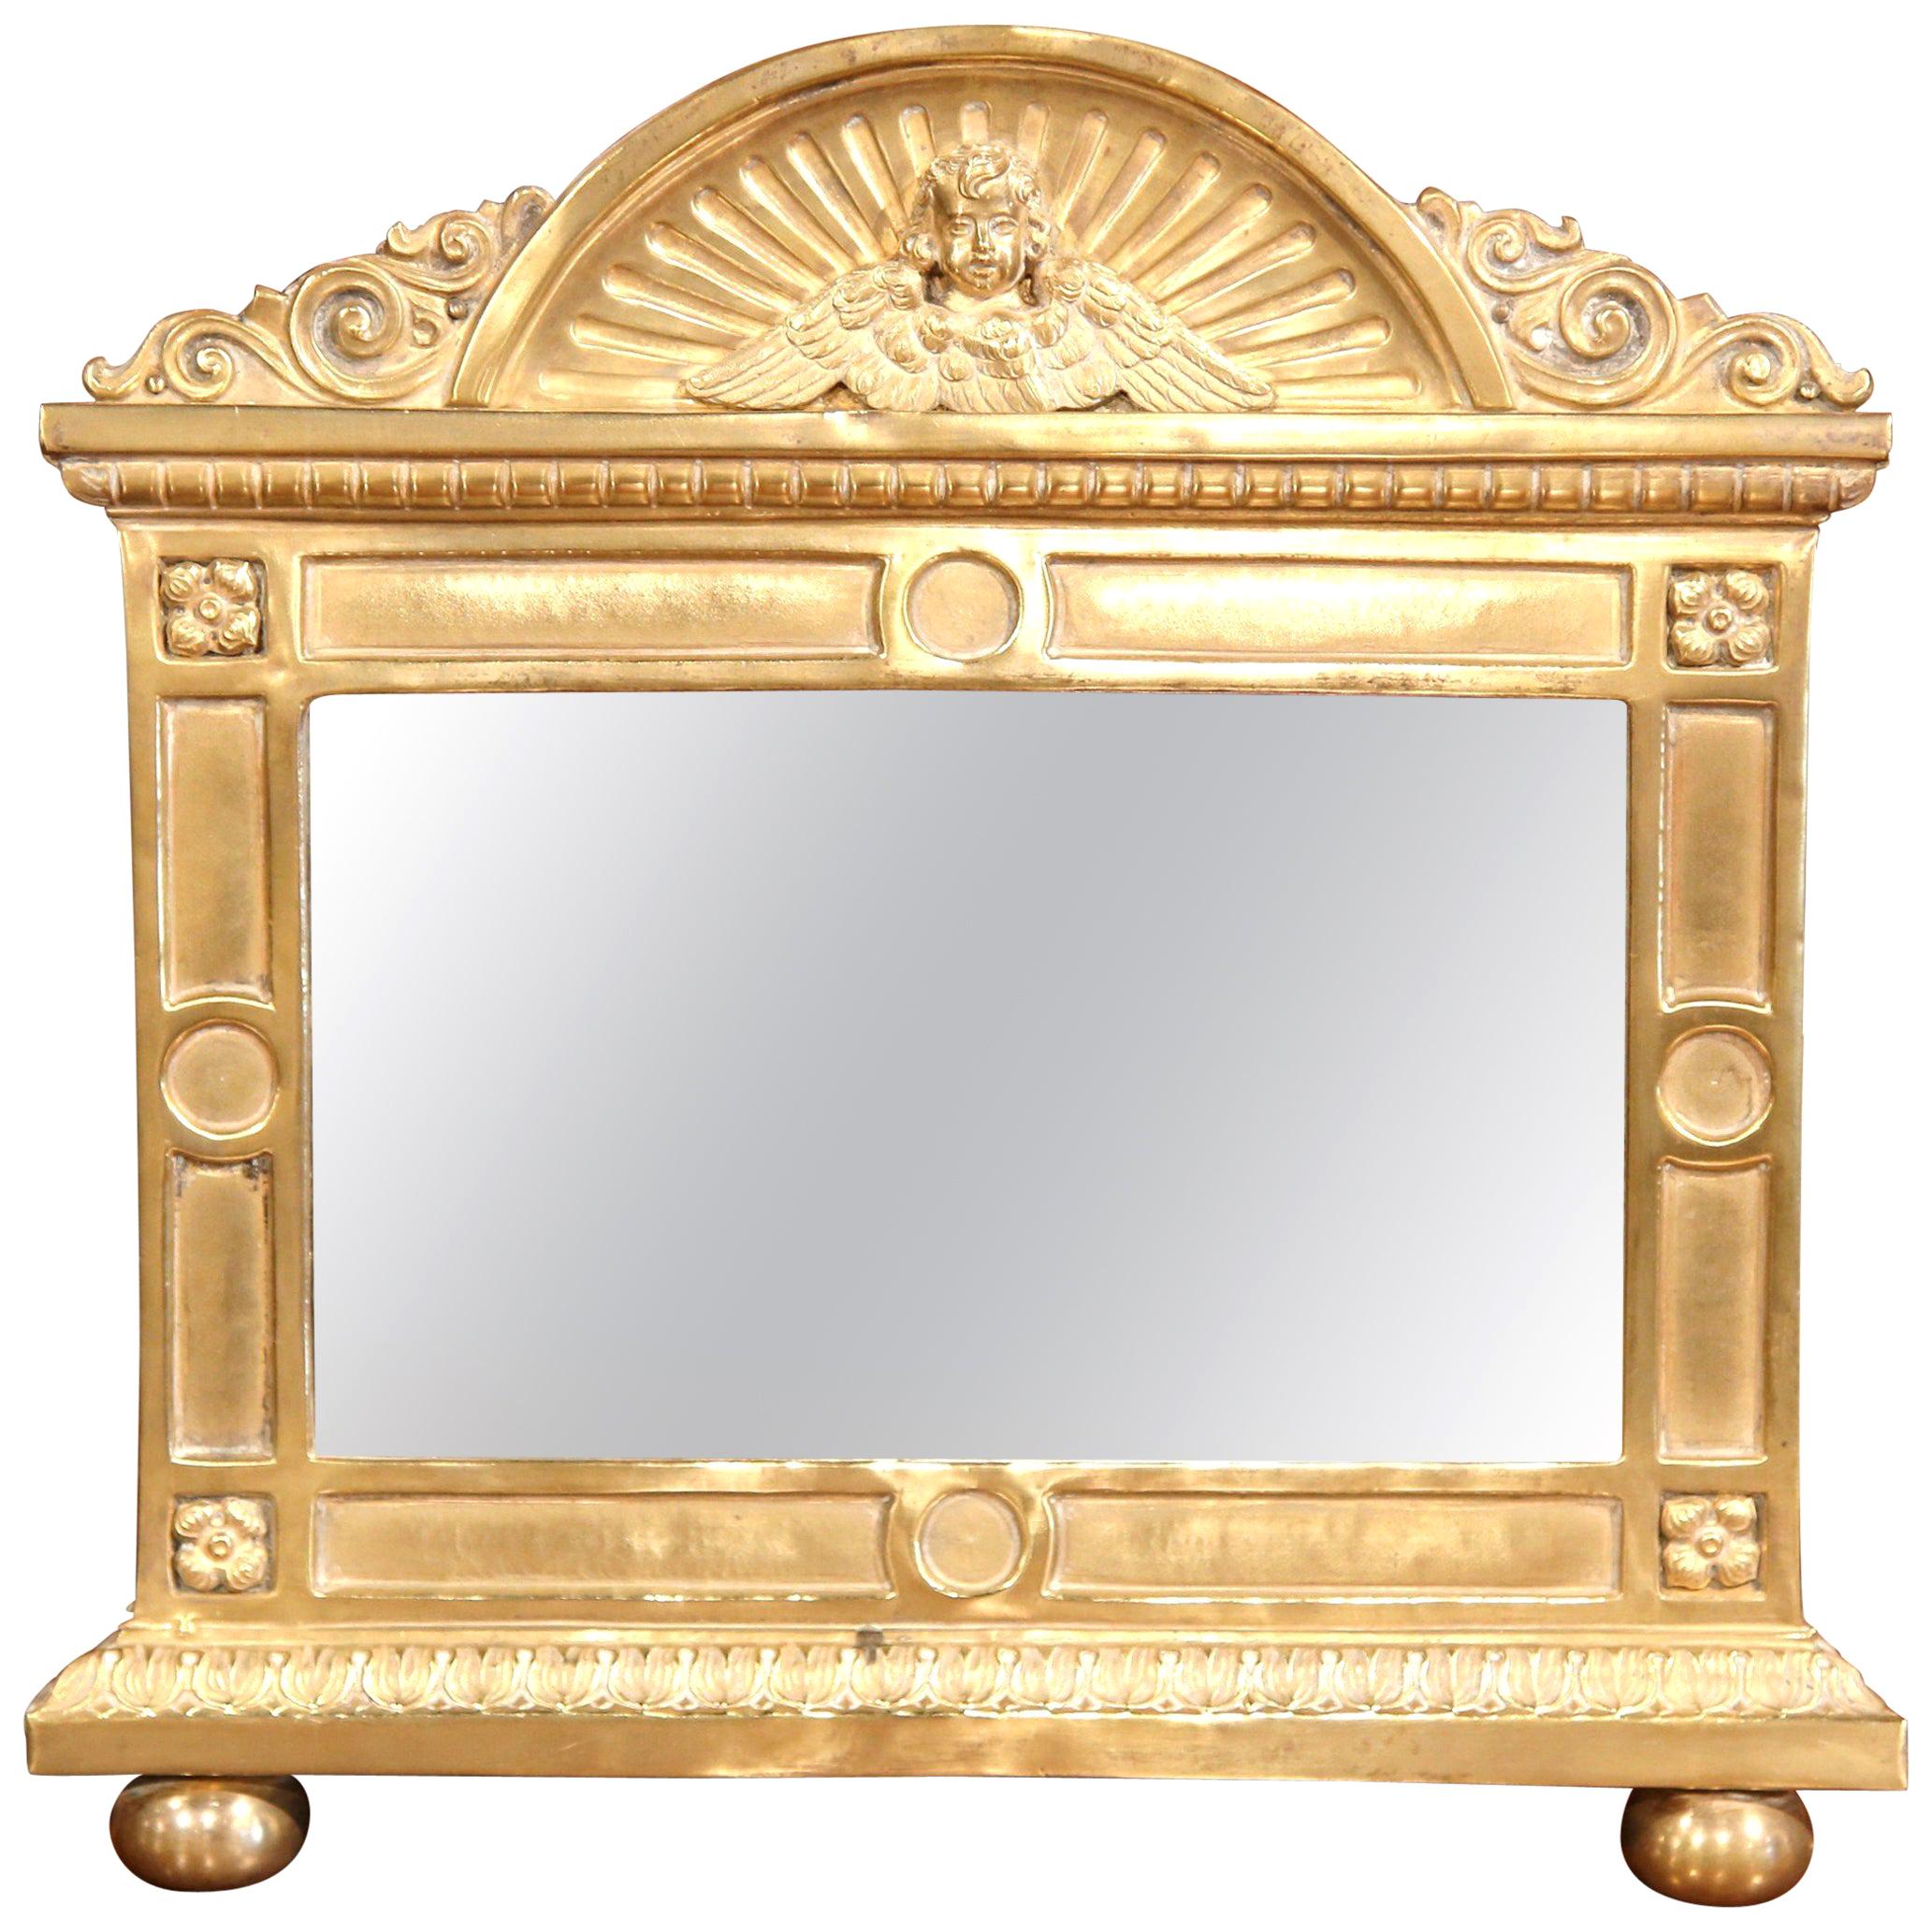 19th Century French Repousse Brass Wall Mirror with Cherub Face Decor For Sale